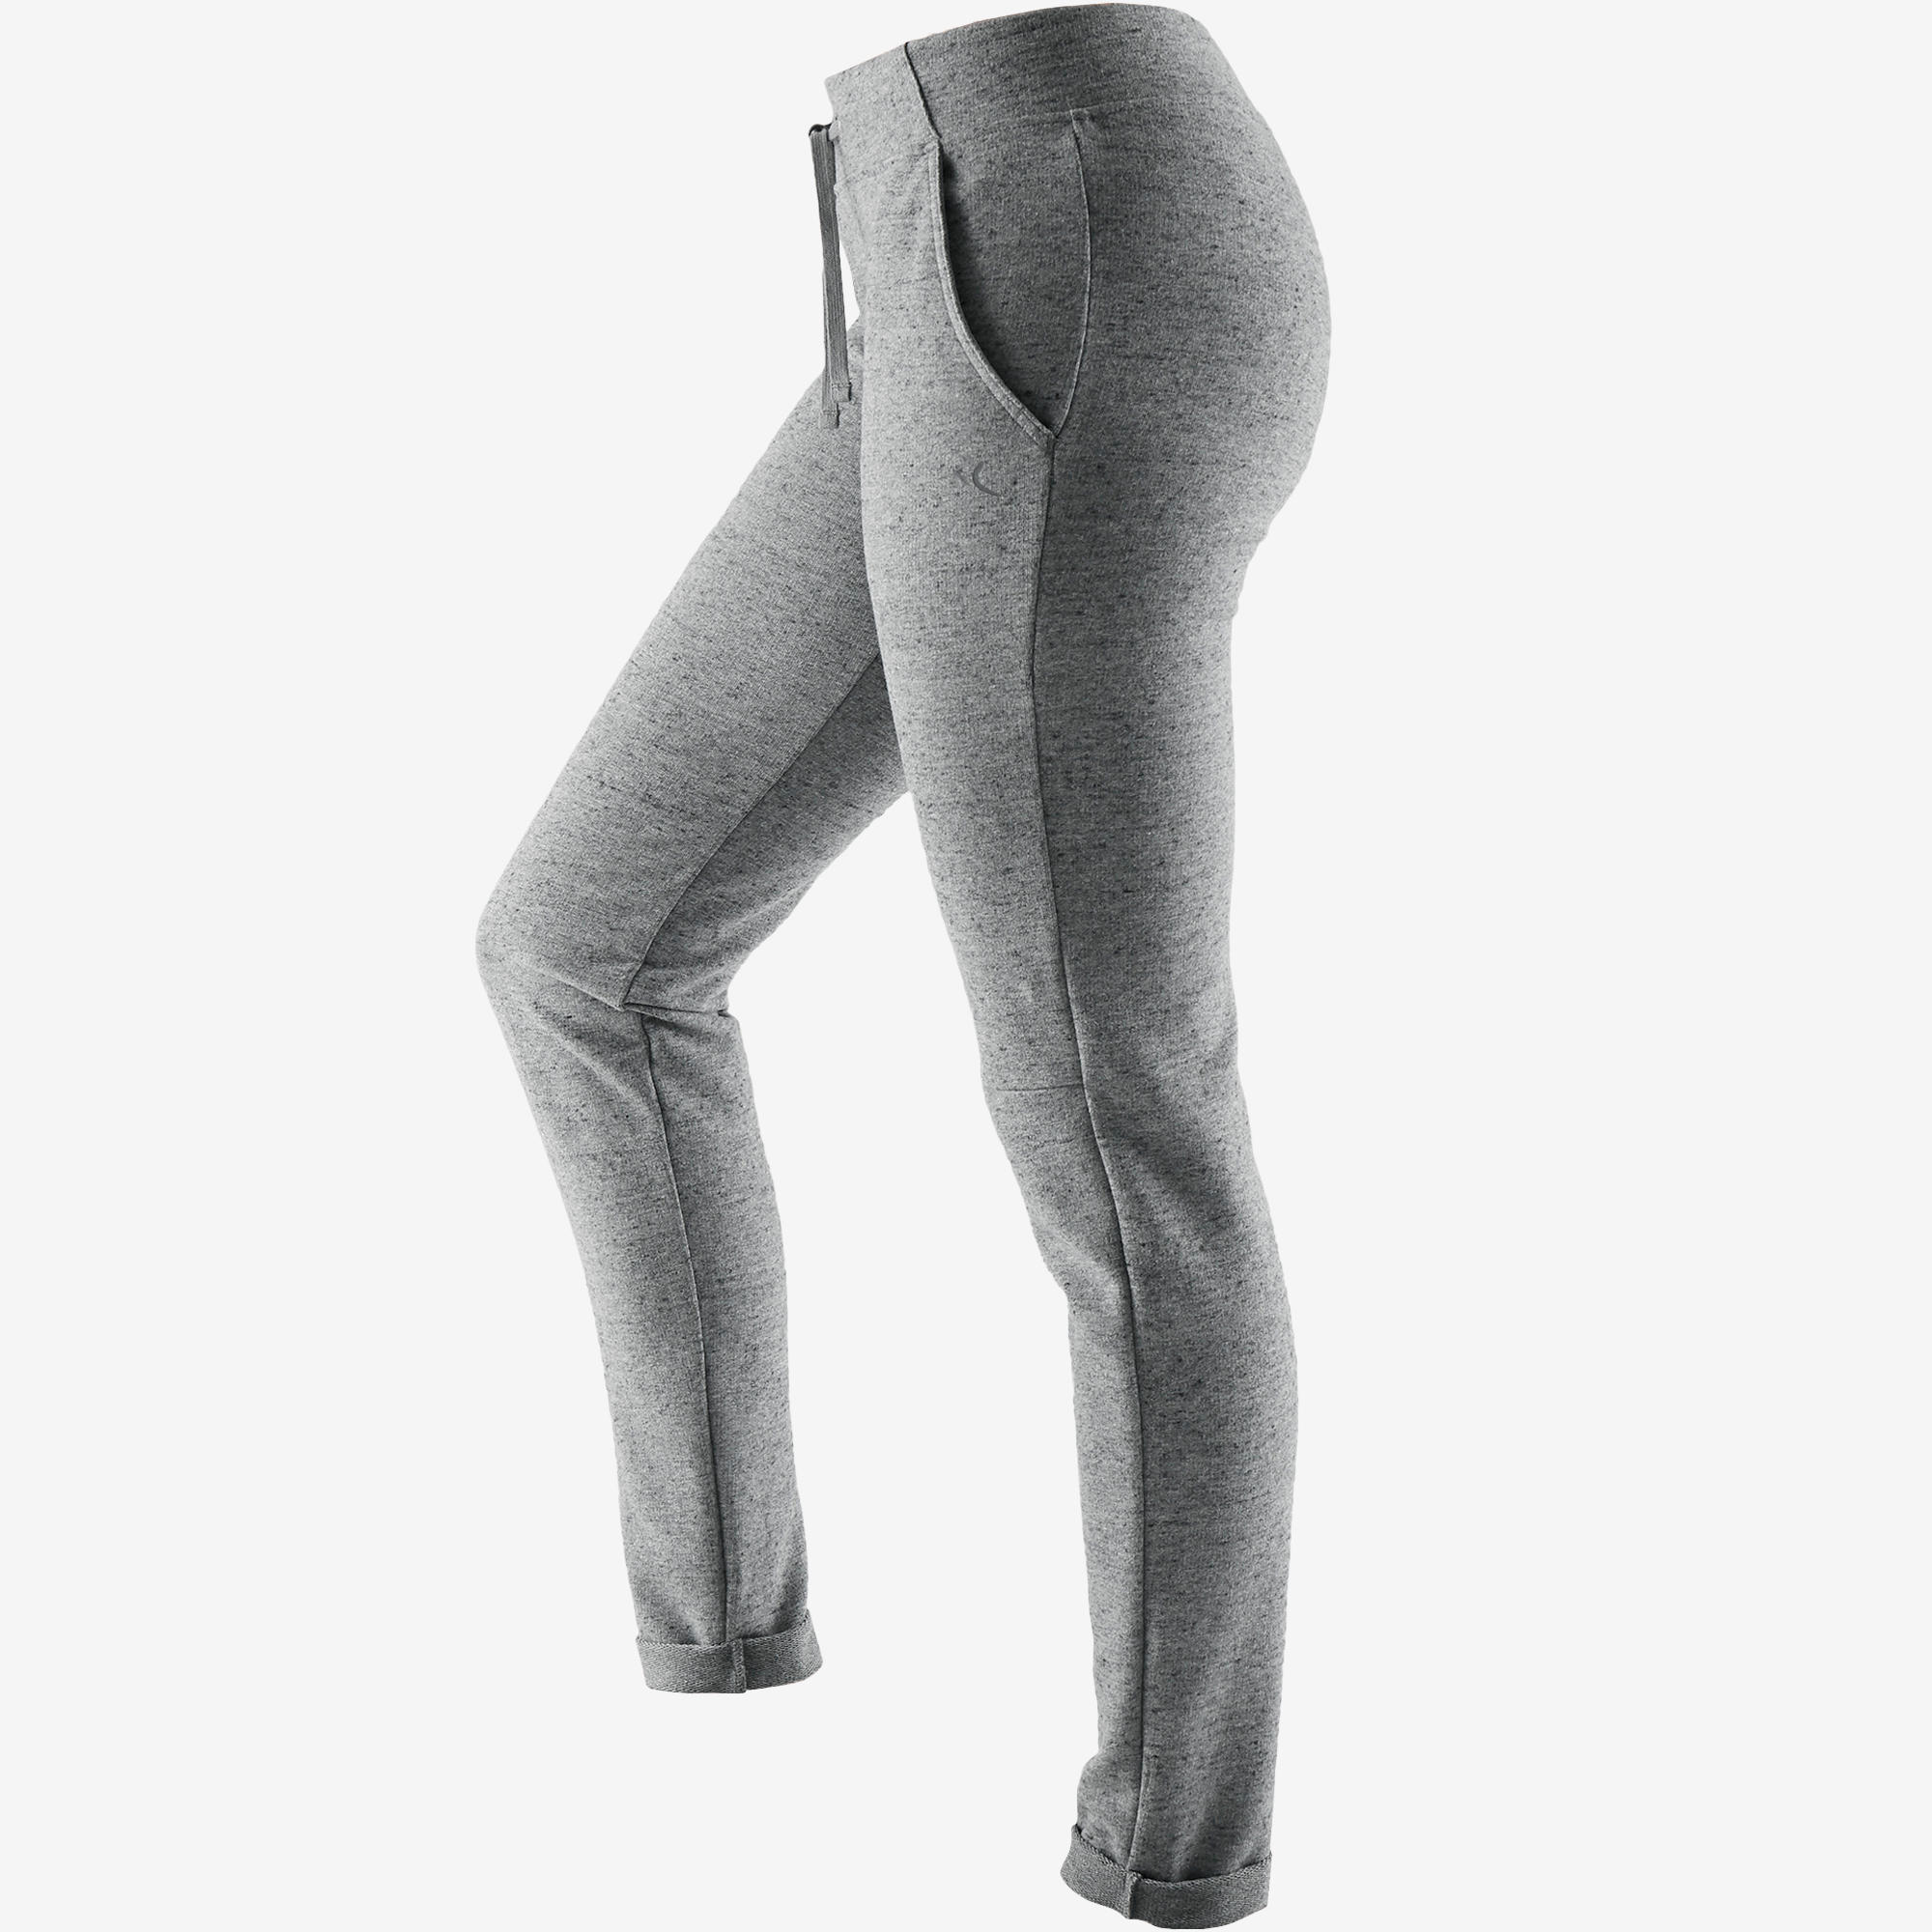 Buy Gray Ankle Length Pant Rayon for Best Price, Reviews, Free Shipping